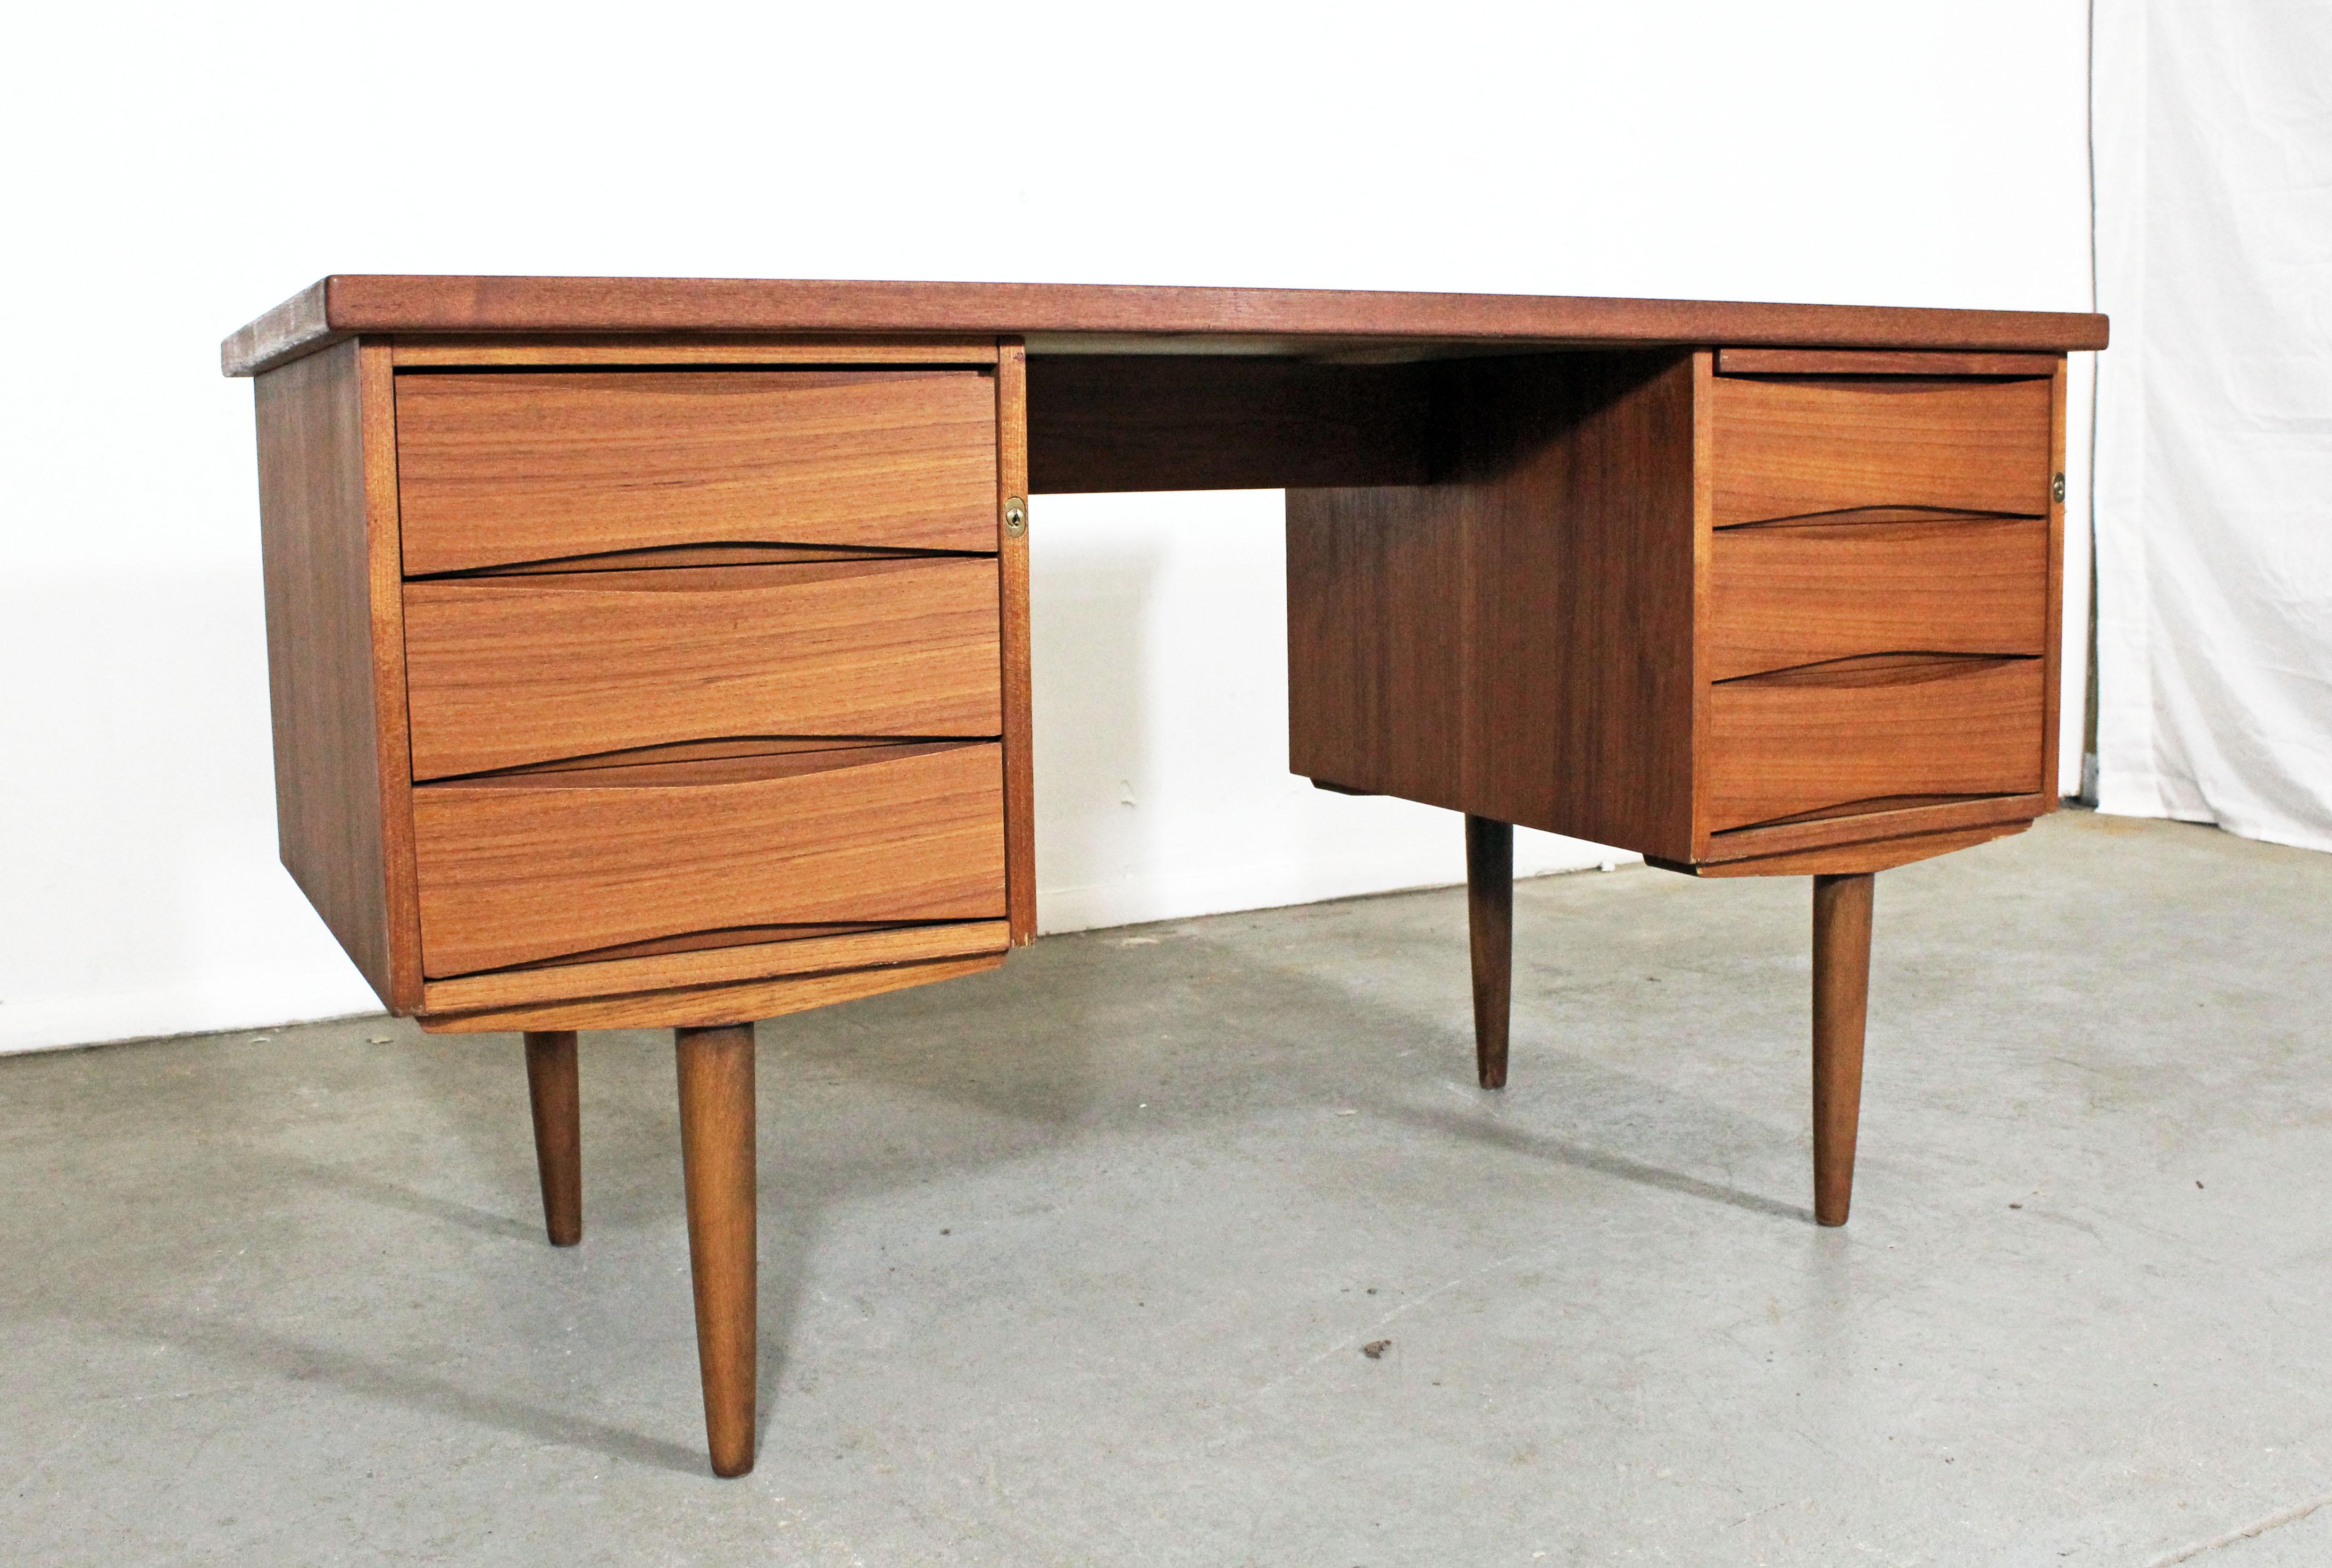 Offered is a beautiful Danish modern teak desk, similar to the style of Arne Vodder. It has three drawers with sculpted pulls on both sides and one pullout / pull-out shelf (see pictures). The desk is in very good condition, has normal age wear